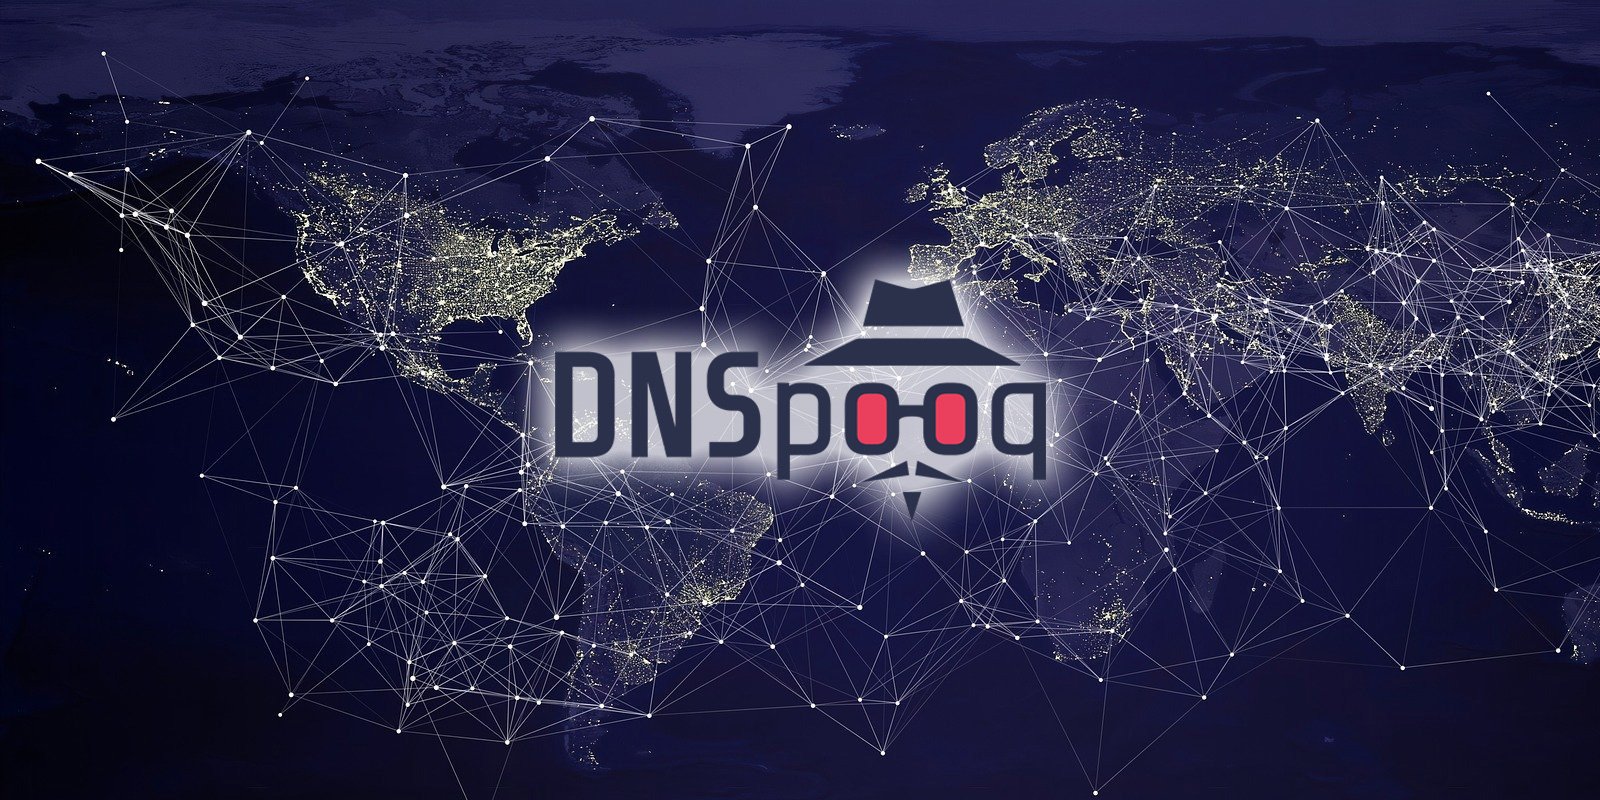 list-of-dnspooq-vulnerability-advisories,-patches,-and-updates